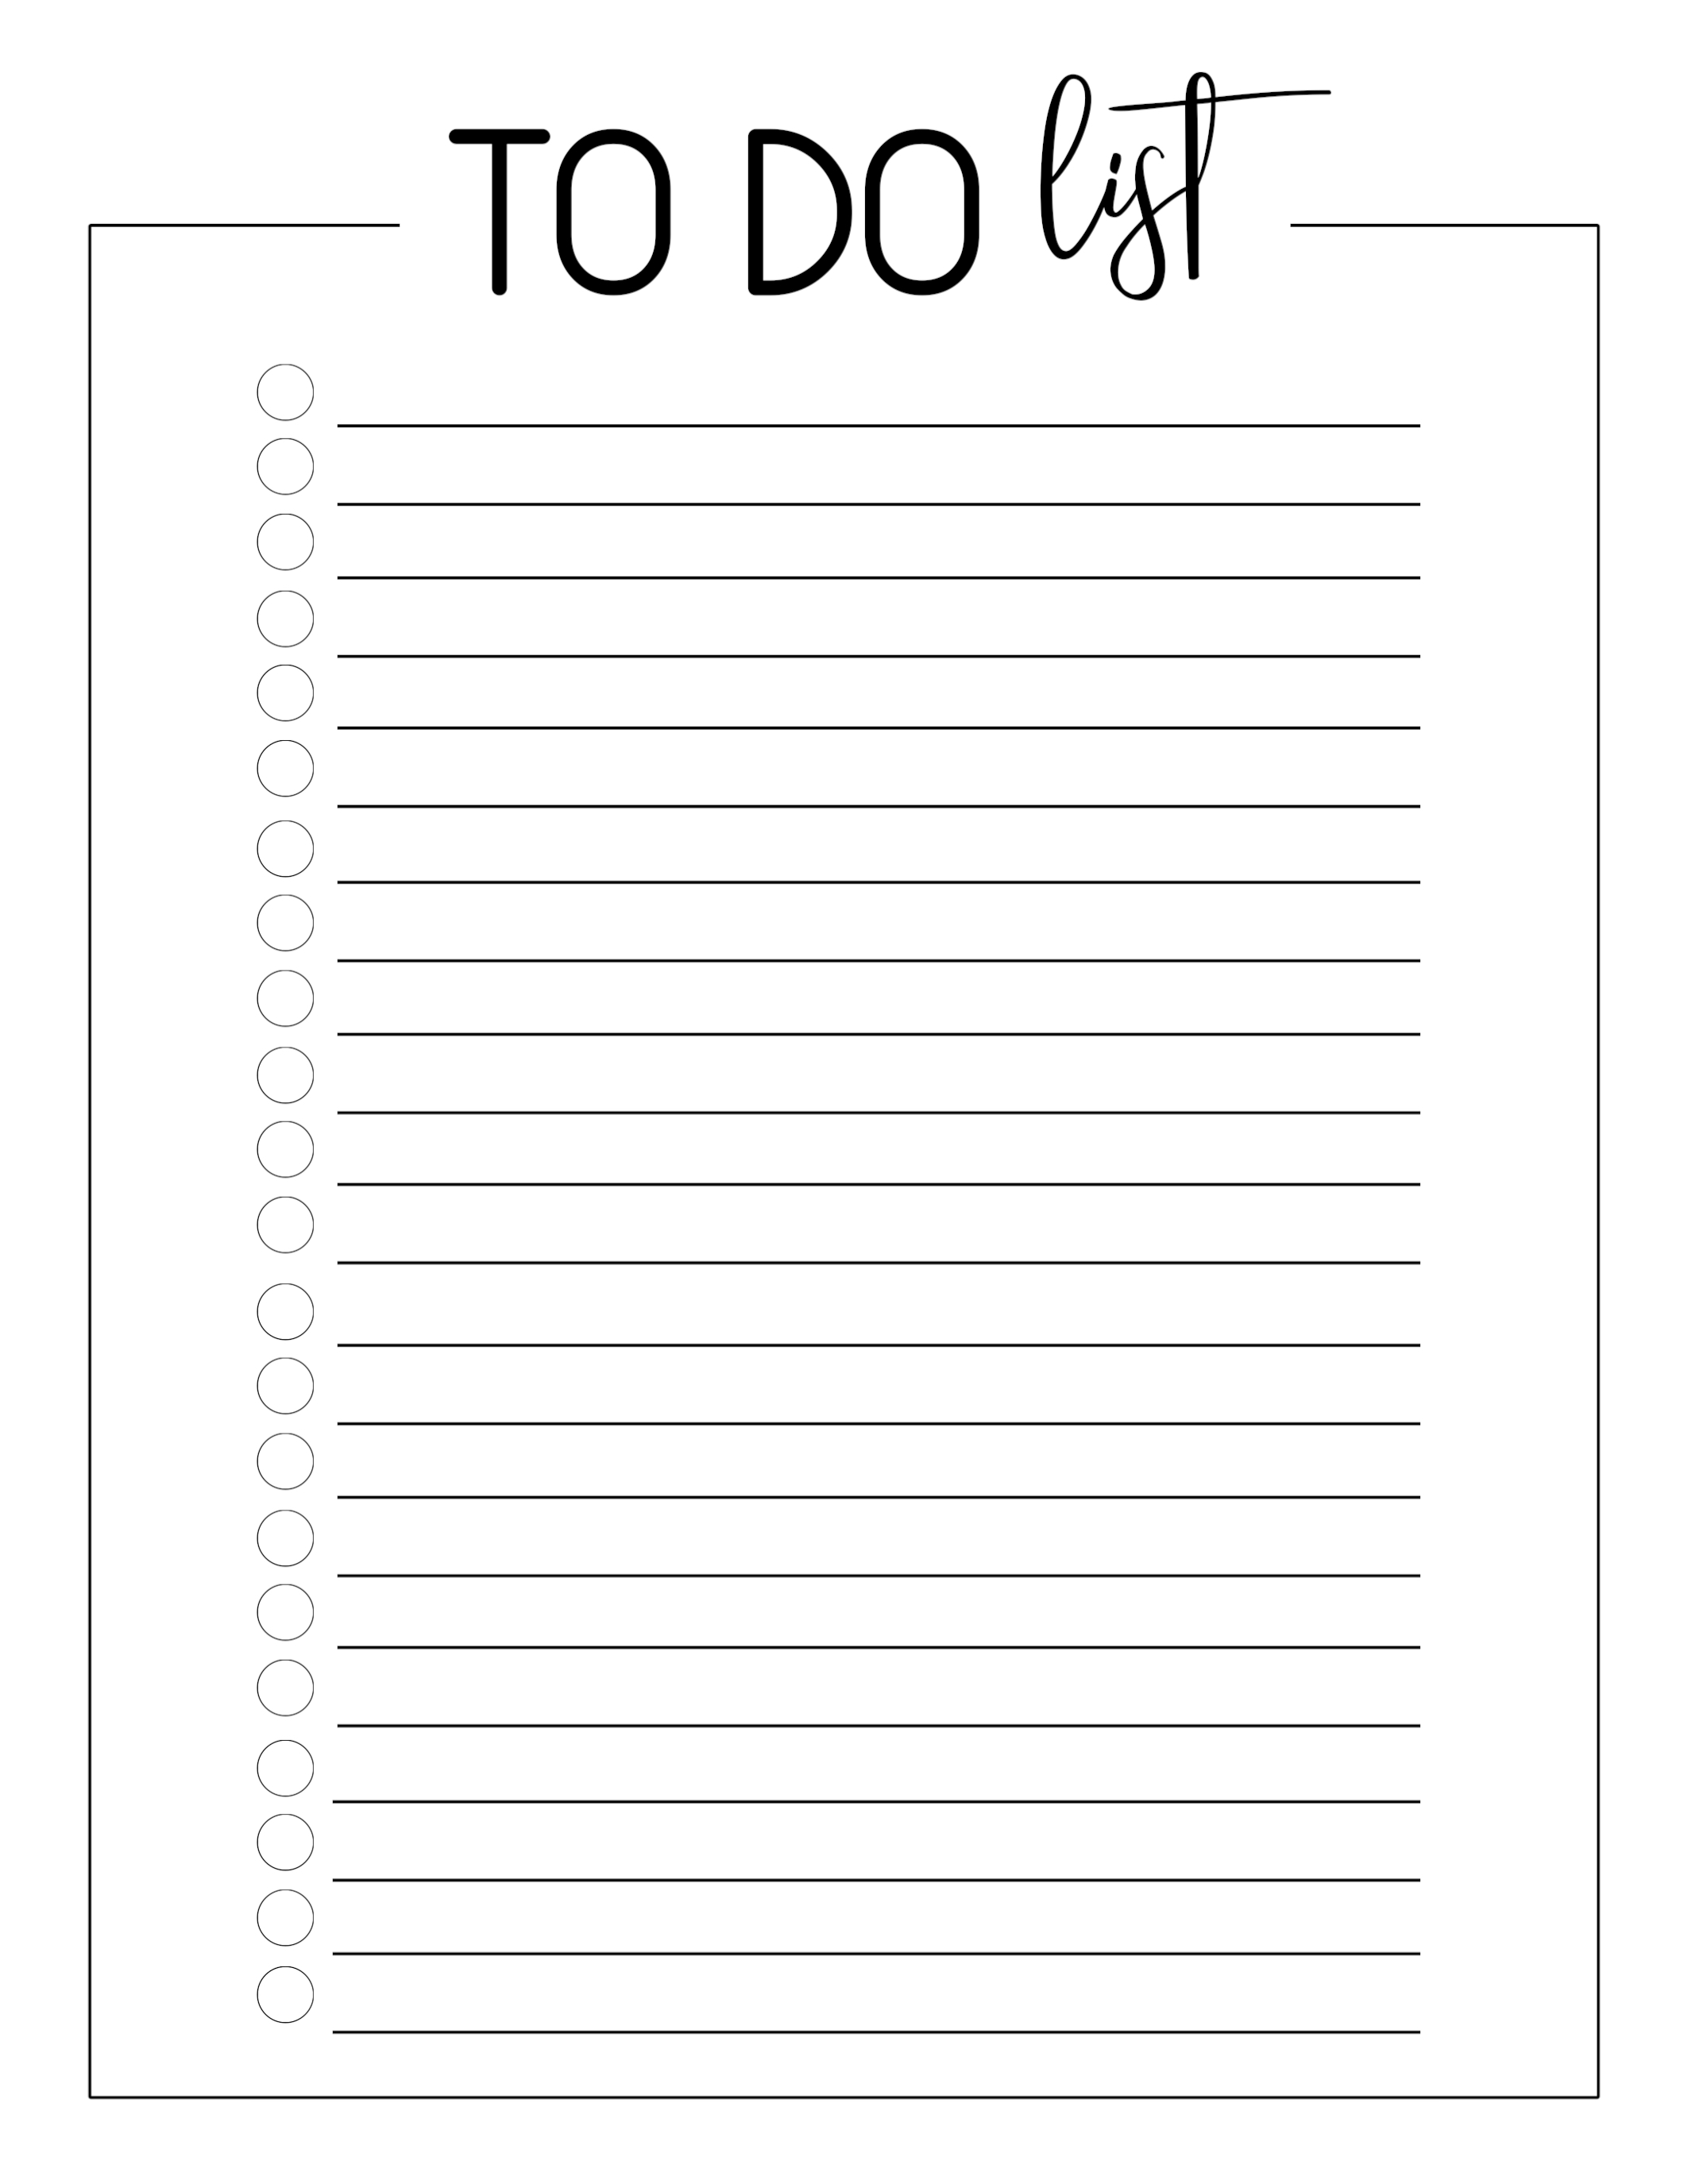 Free Printable To Do Checklist Template - Paper Trail Design With Regard To Blank To Do List Template